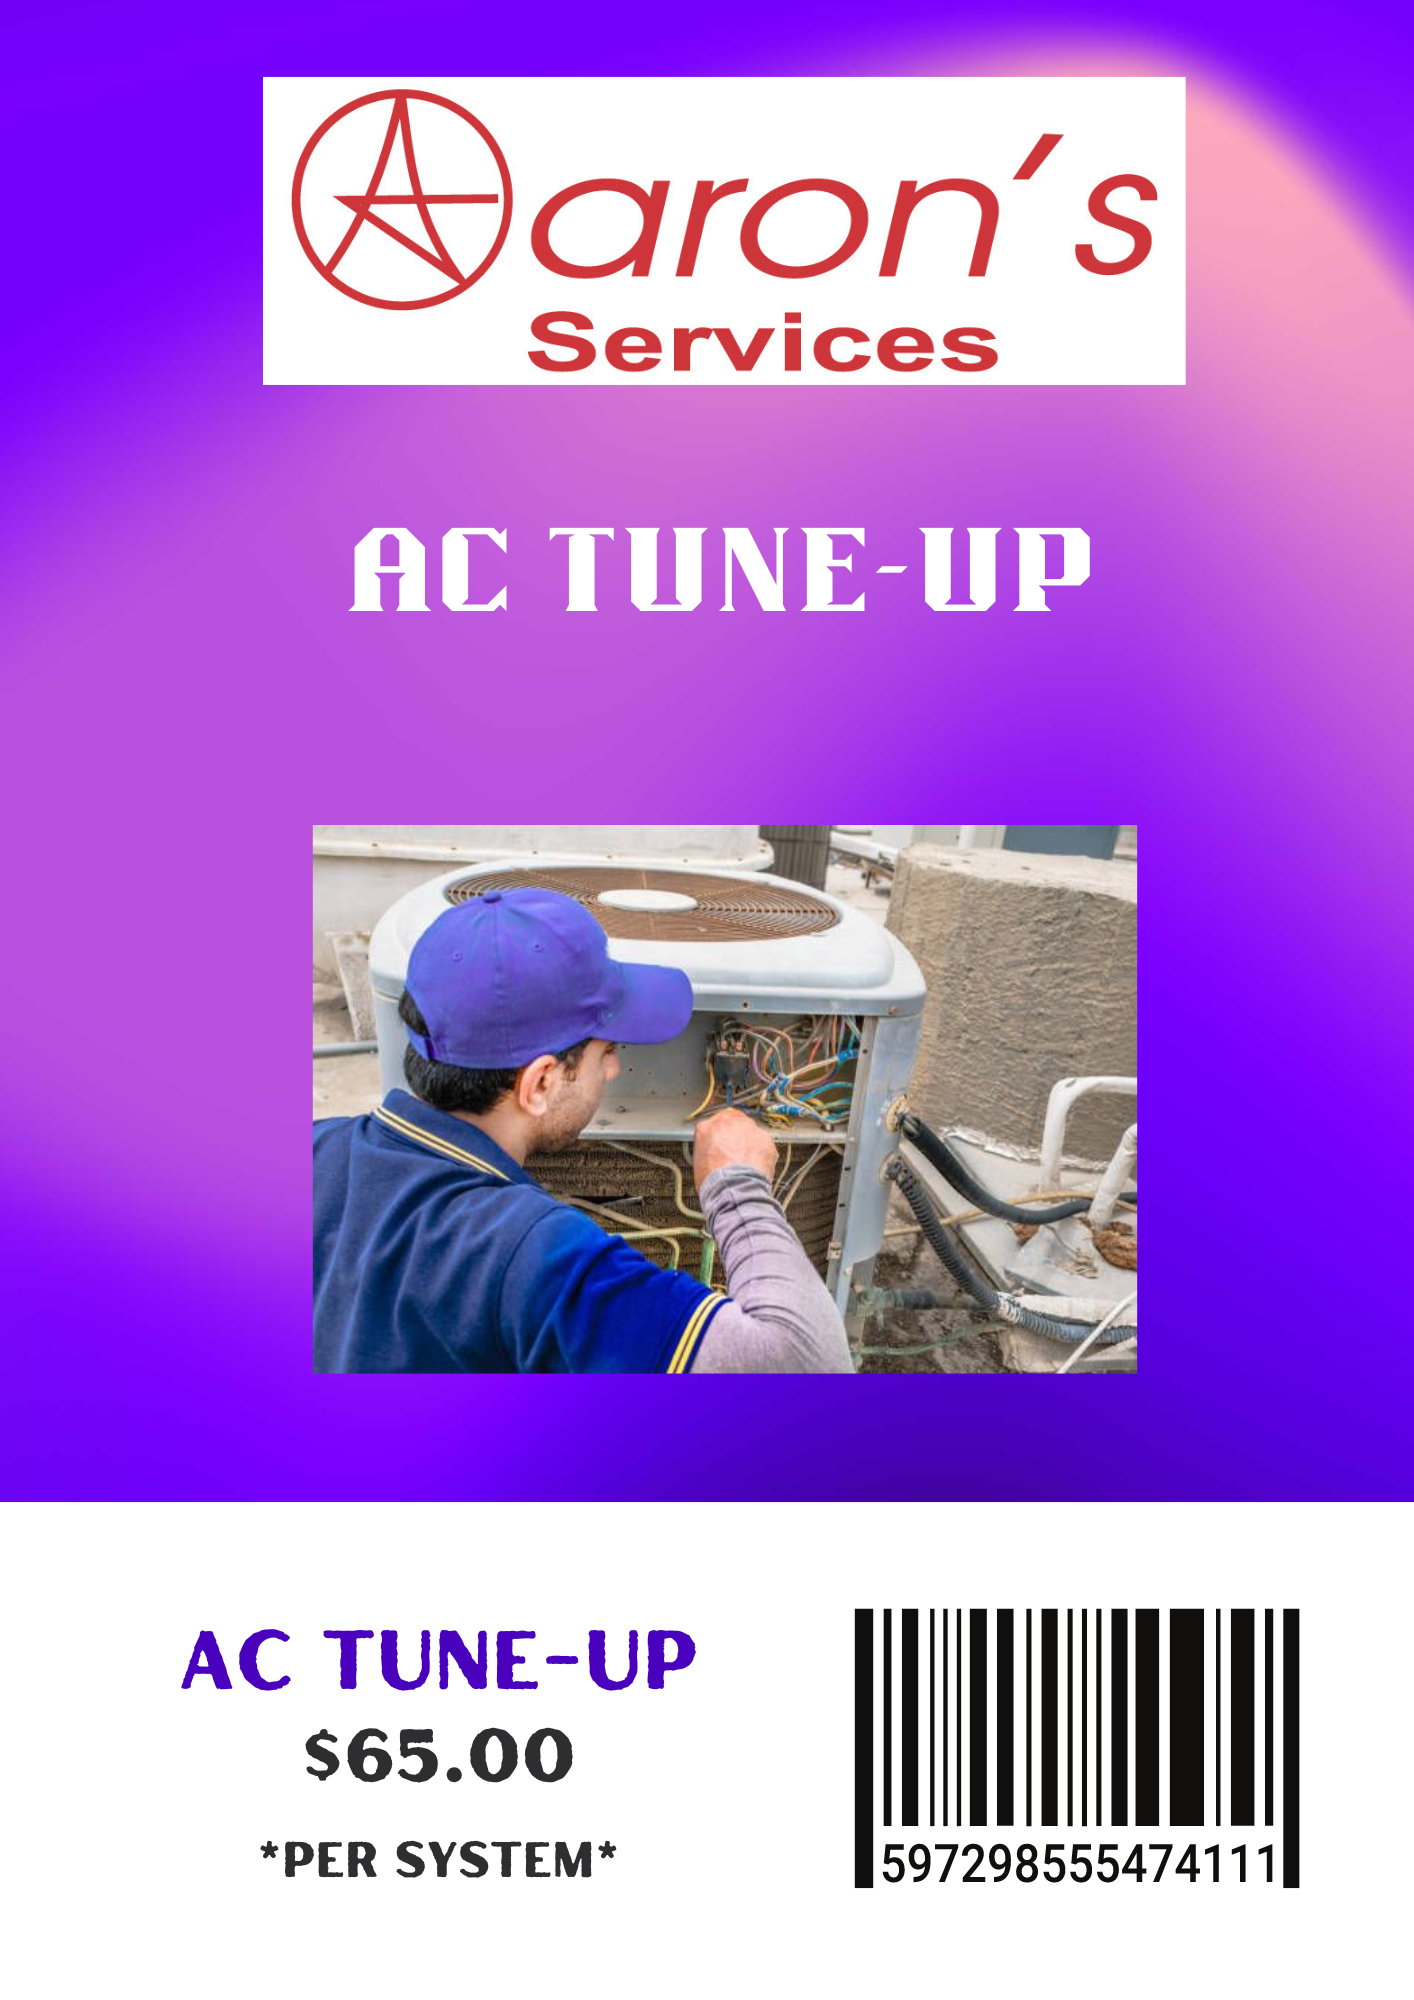 Aaron's AC Tune-Up Coupon